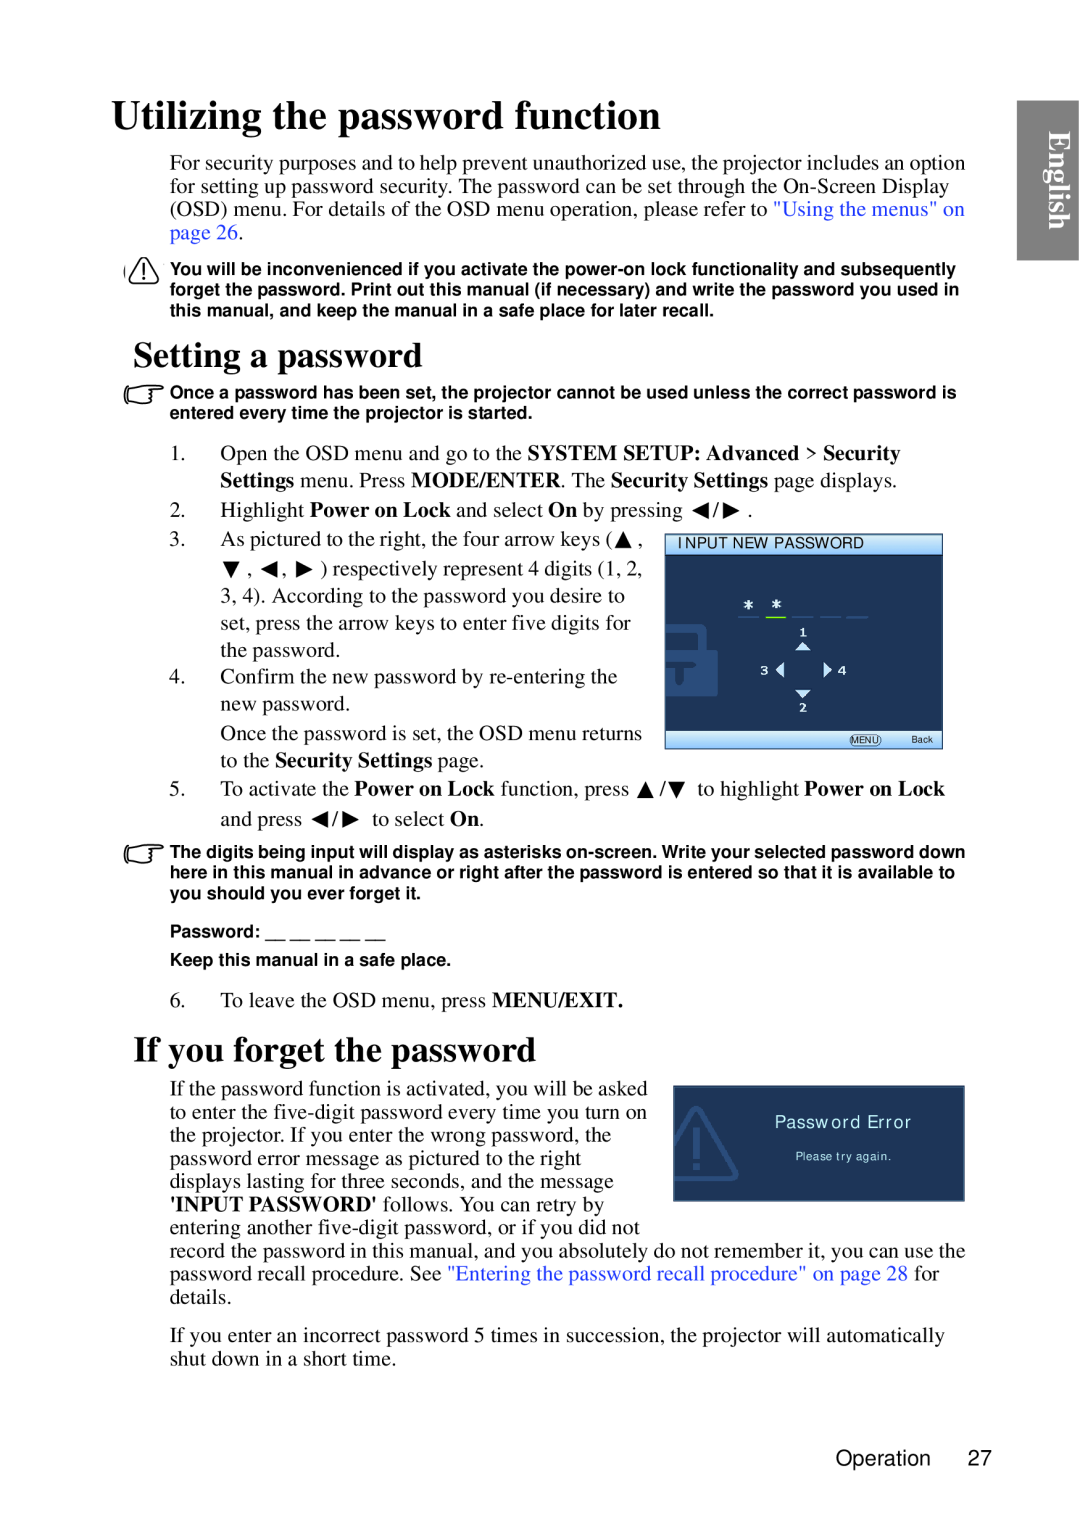 BenQ SP840 user manual Utilizing the password function, Setting a password, If you forget the password, English 